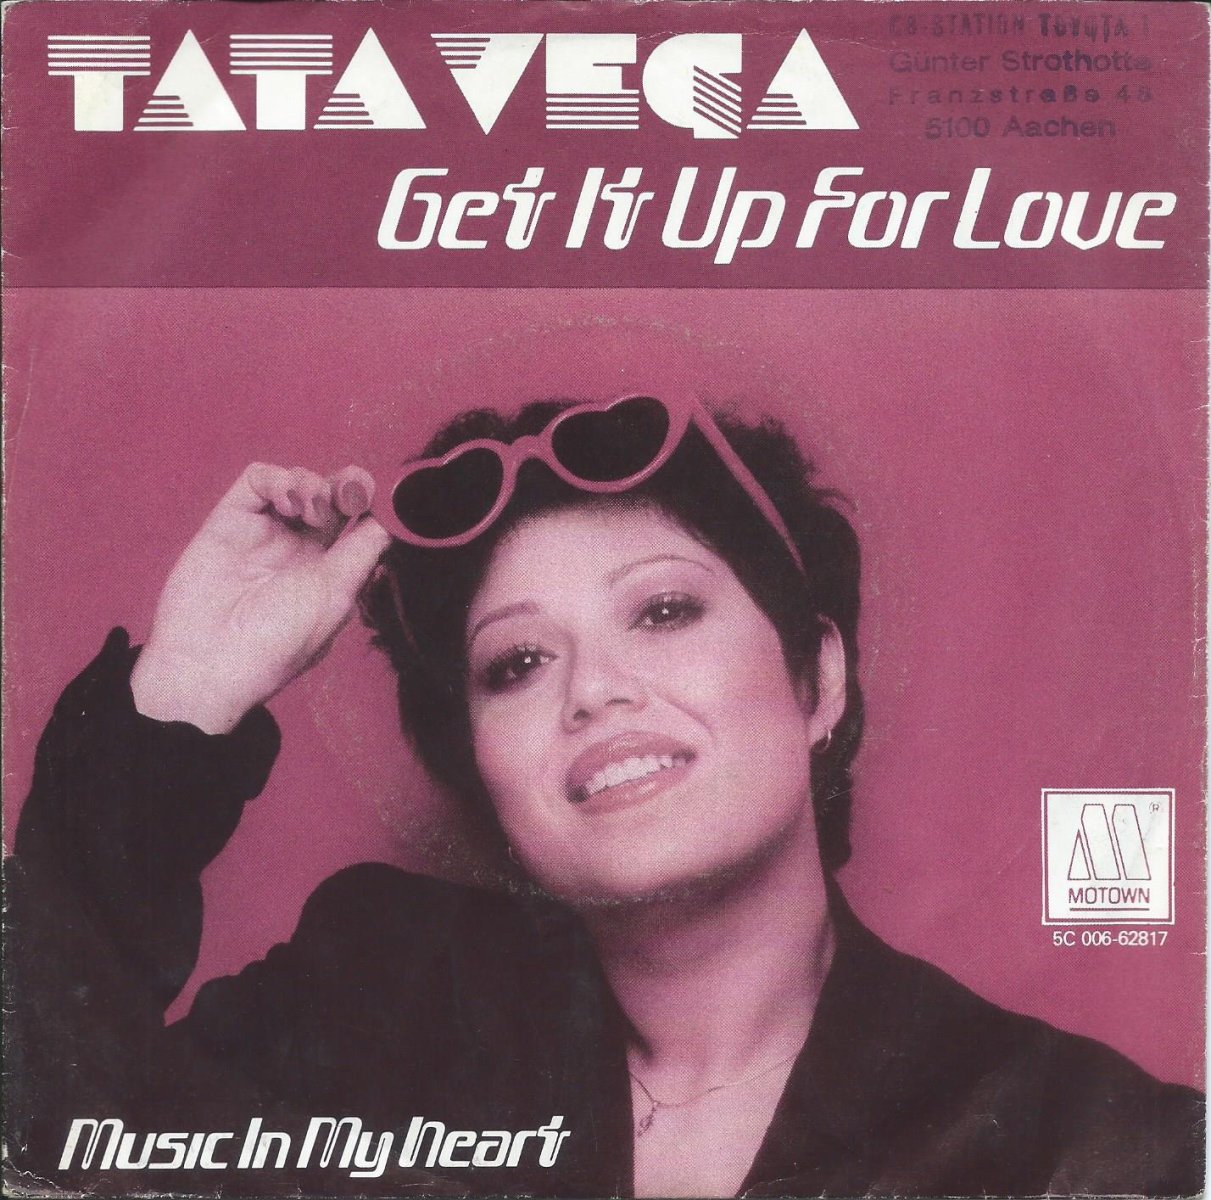 TATA VEGA / GET IT UP FOR LOVE / MUSIC IN MY HEART (7